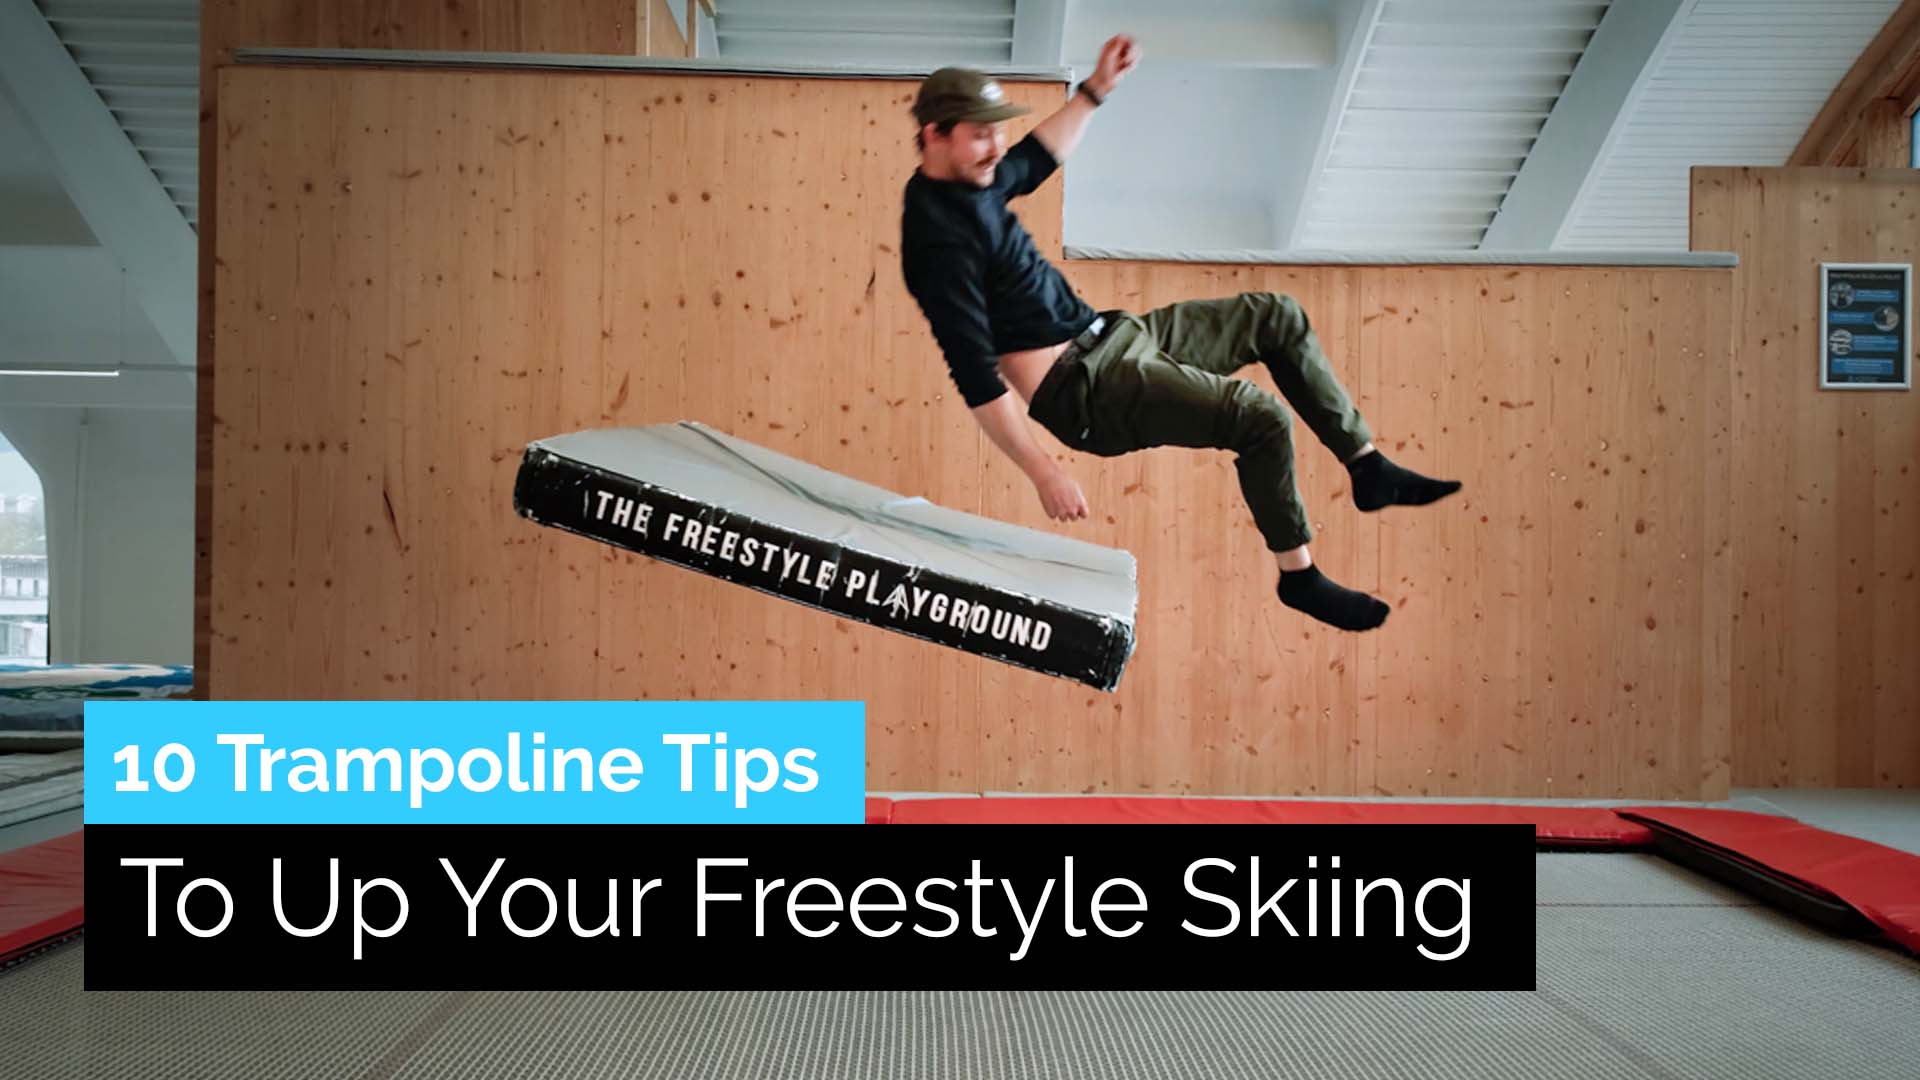 10 Tips to Excel - Trampoline Training for Freestyle Skiing